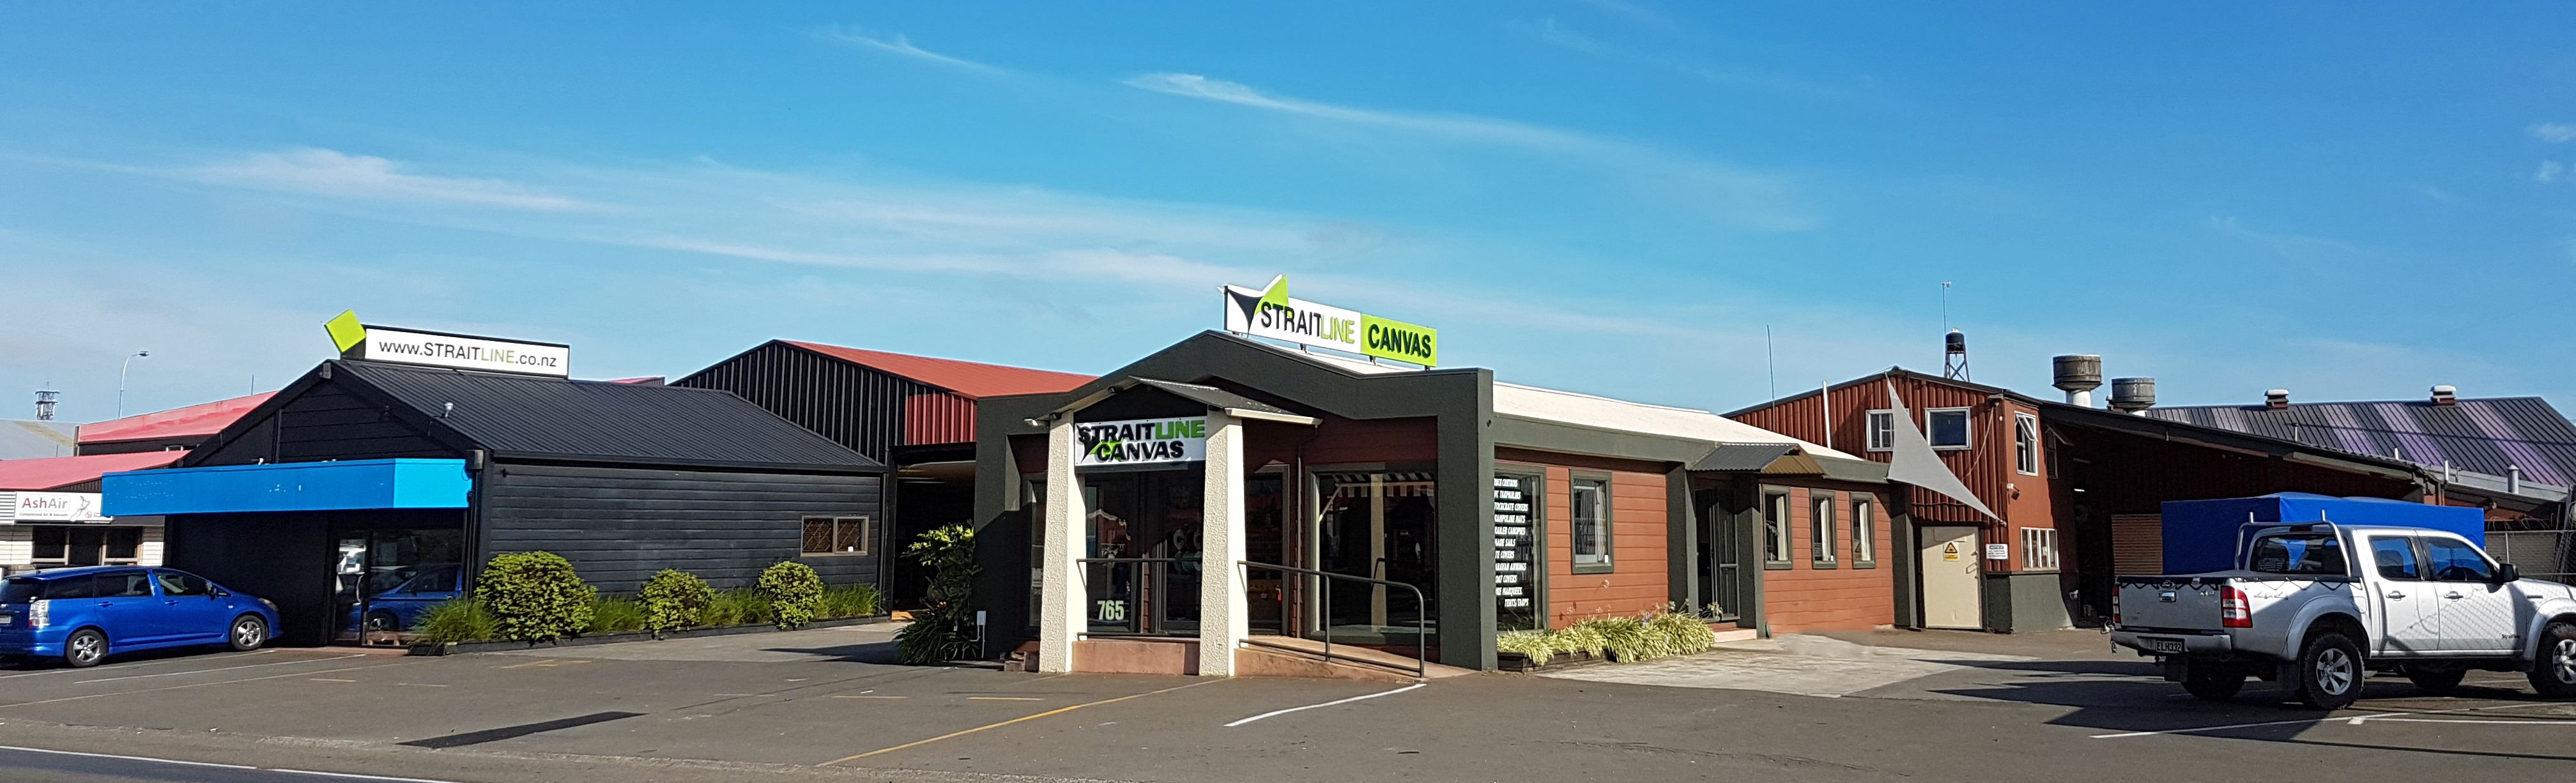 Street view of Straitline's buildings on Tremaine Avenue in Palmerston North New Zealand